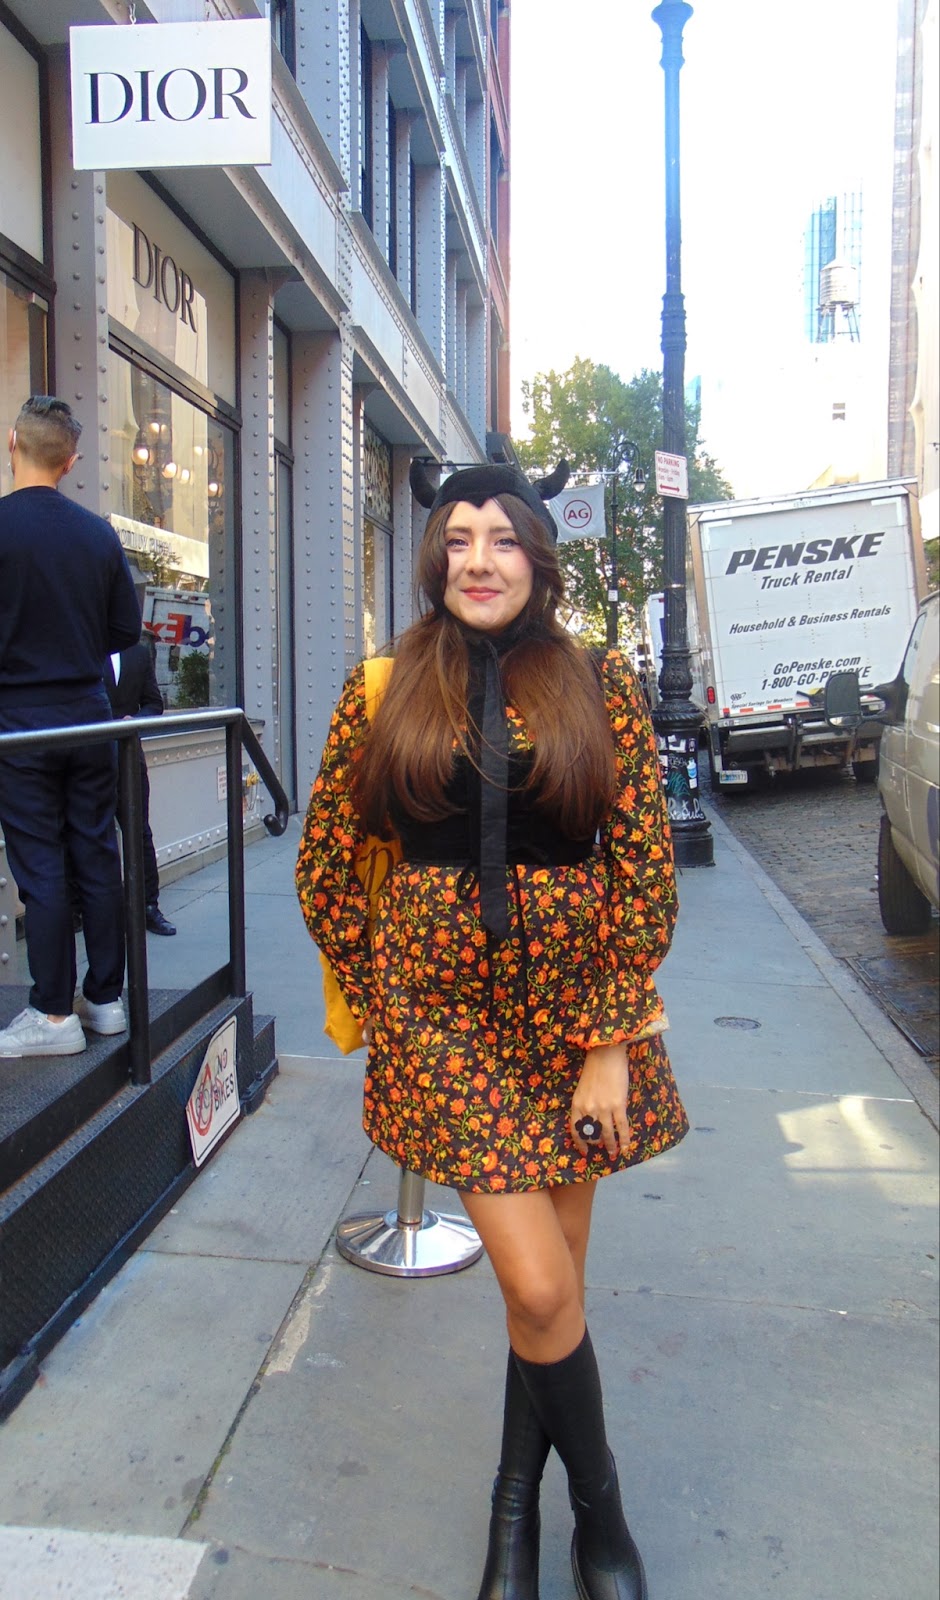 Krystal Alexis in front of the Dior store in Soho wearing a black horned hood, orange floral print dress, and knee high boots. 